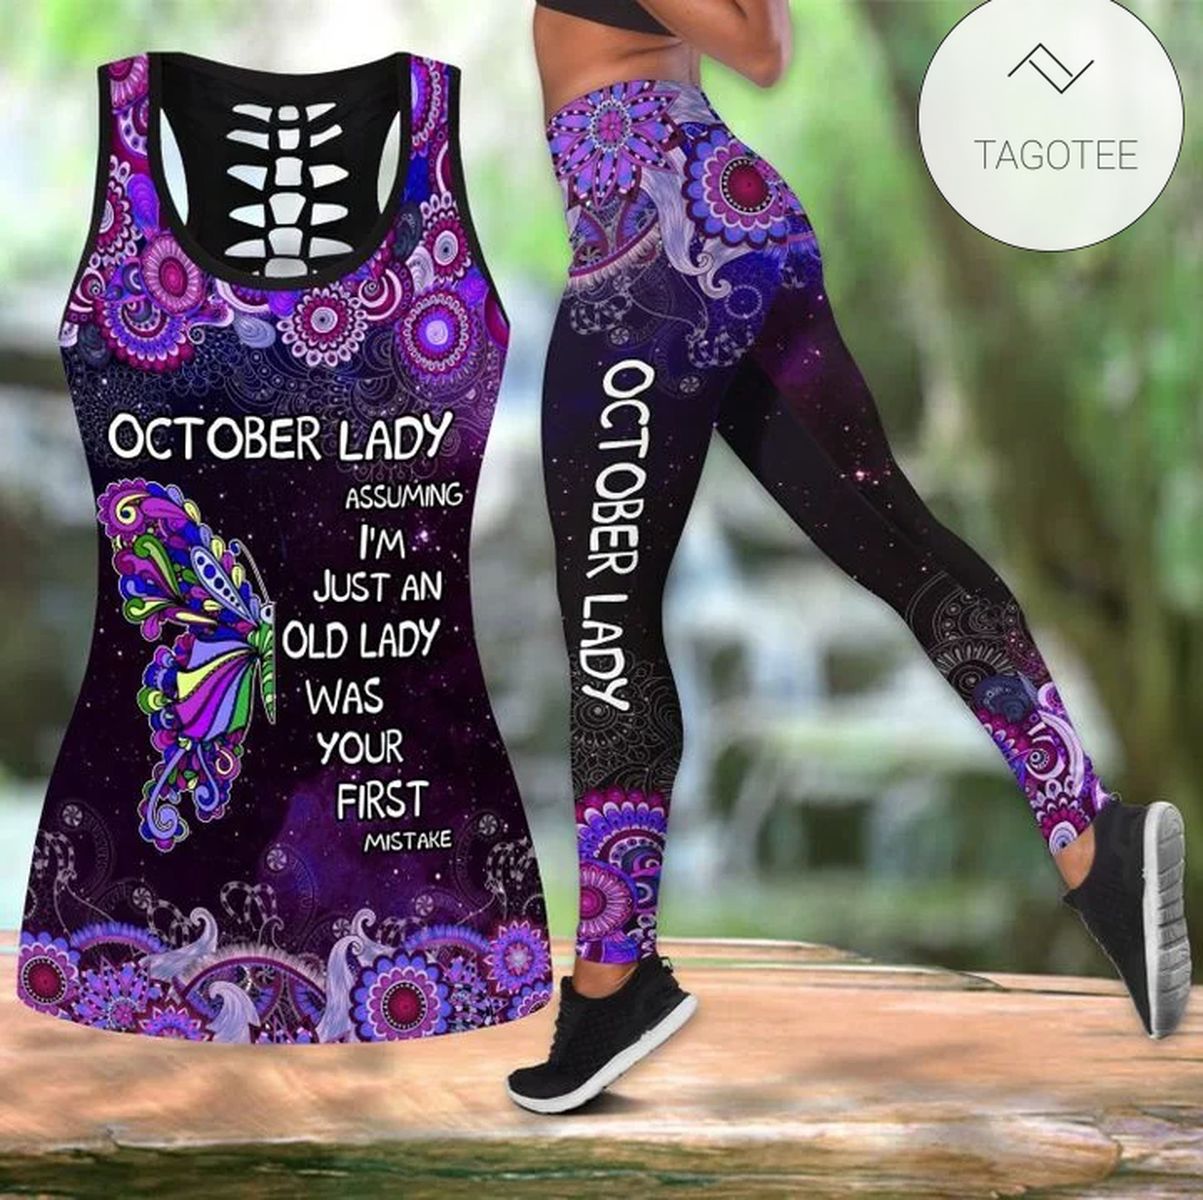 October Lady Assuming I'm Just An Old Lady Was Your First Mistake Hollow Tank Top And Leggings